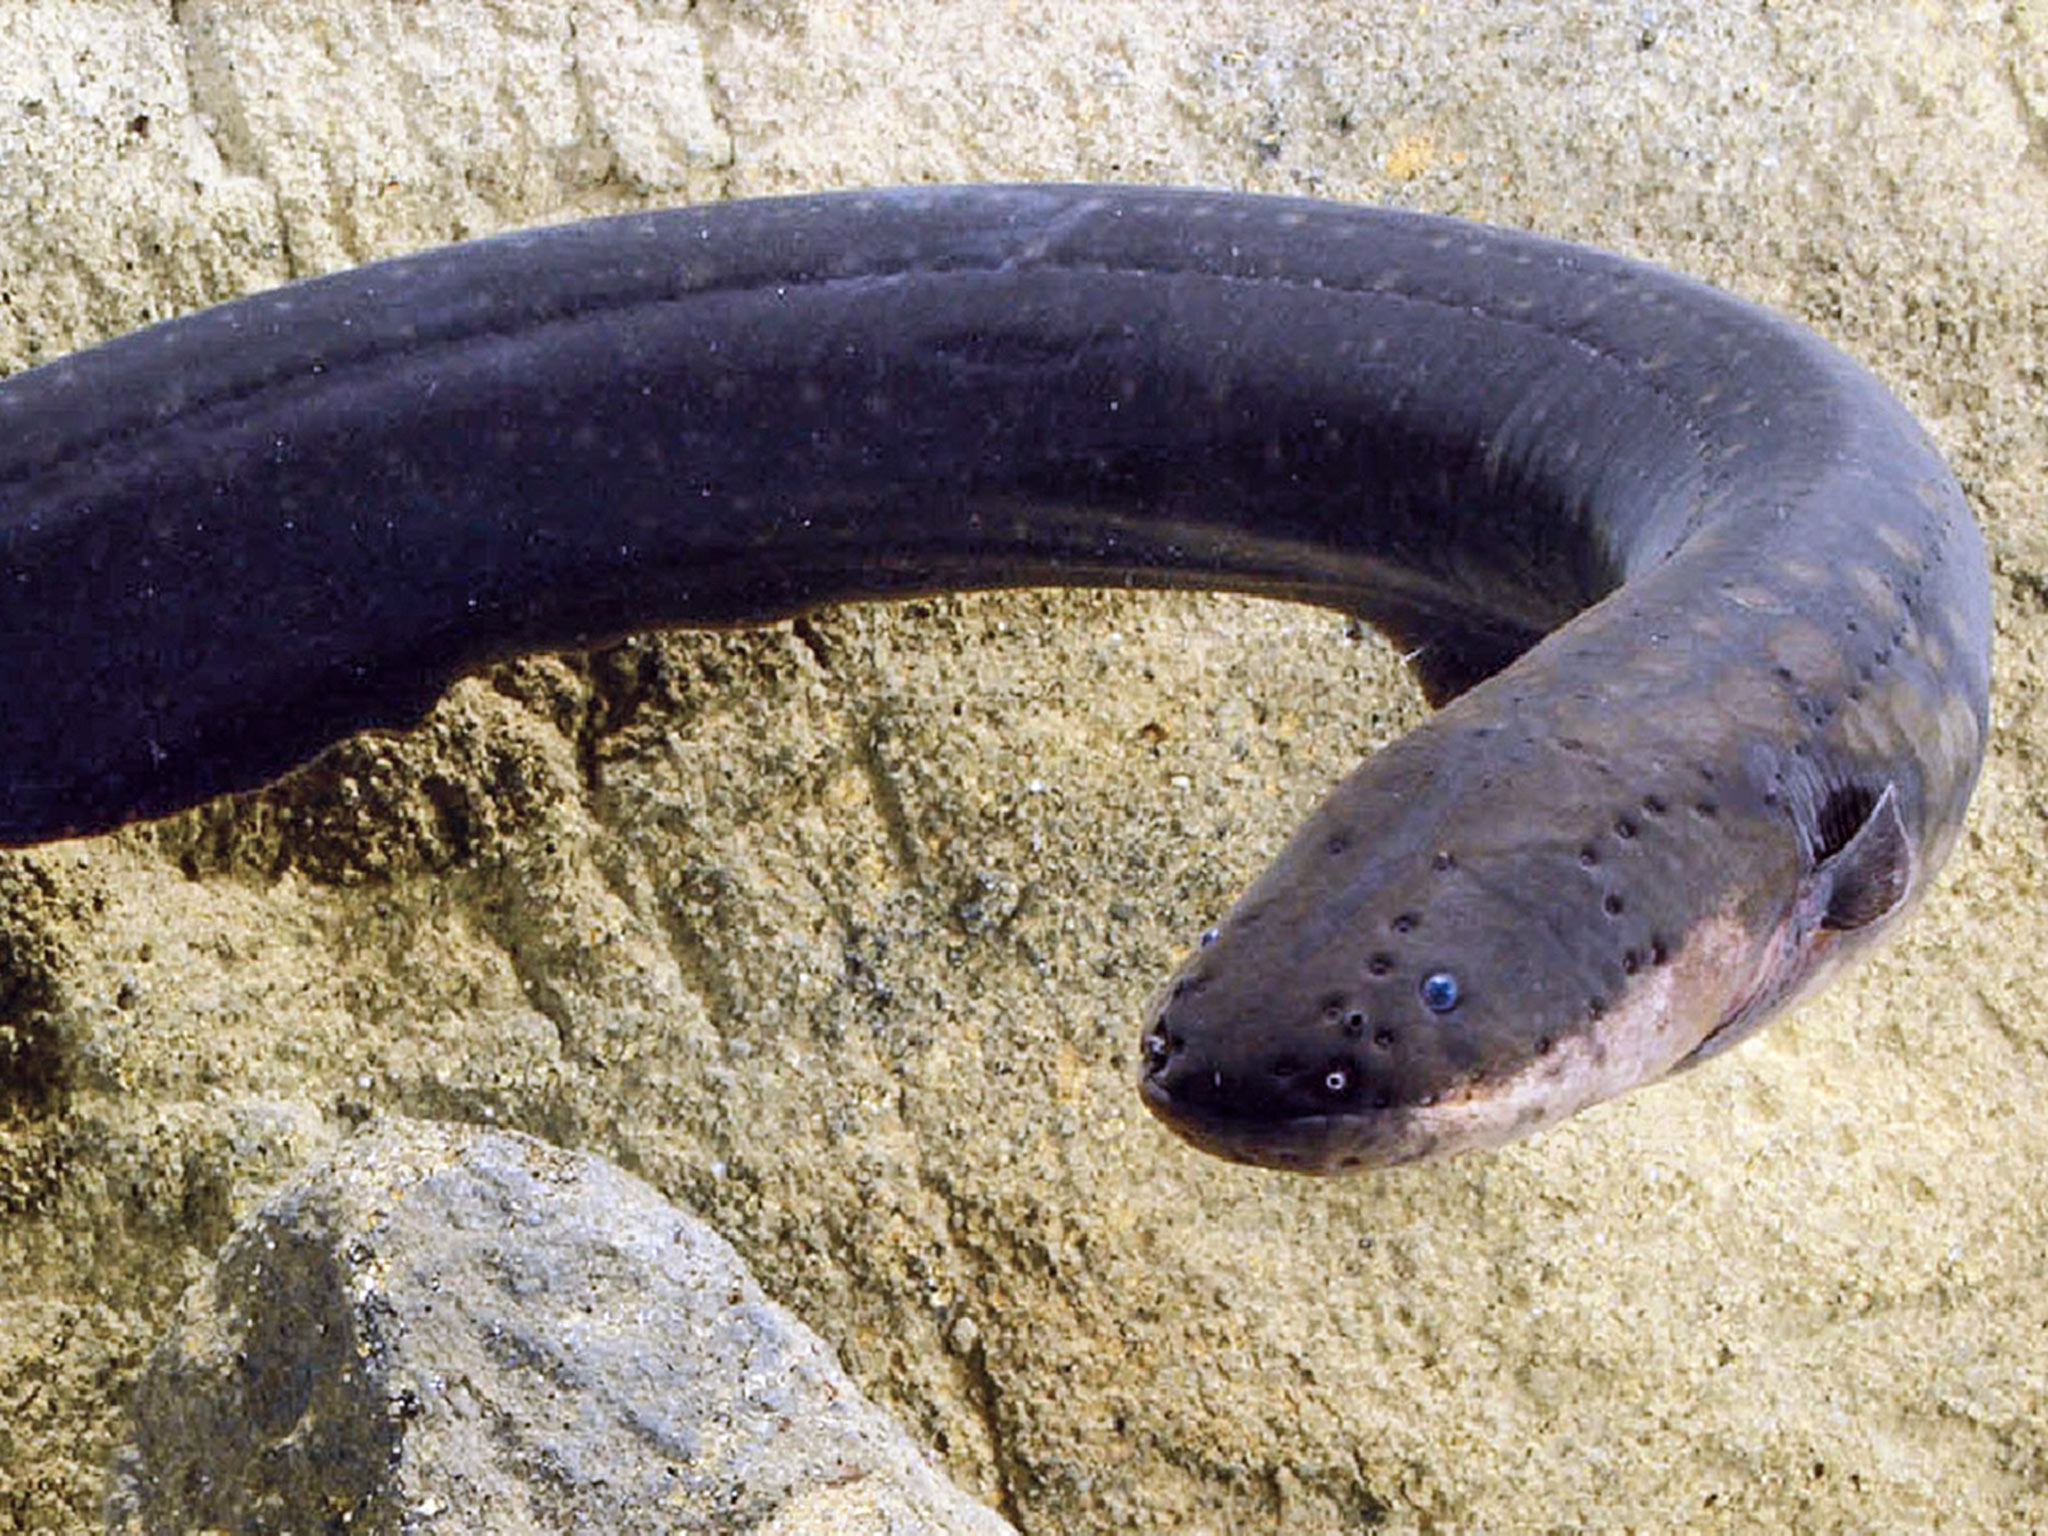 https://facts.net/wp-content/uploads/2023/07/20-facts-about-eels-1689505311.jpg